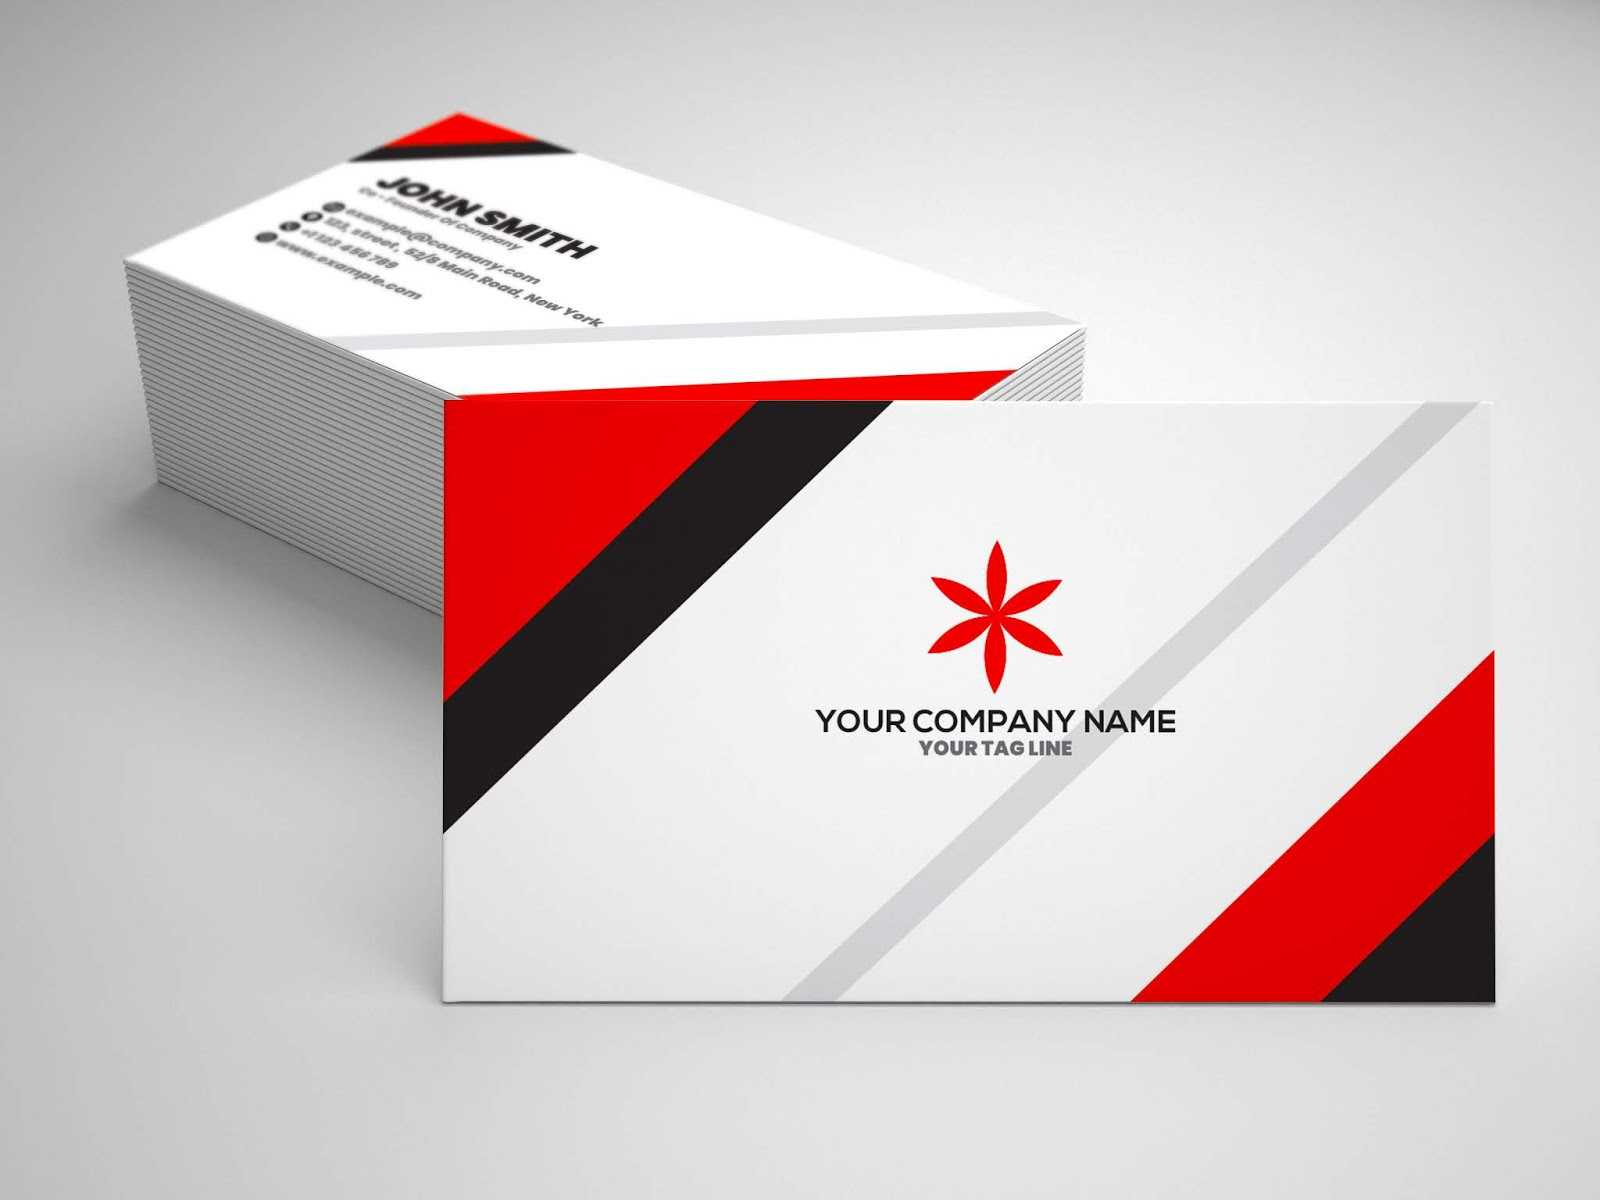 How To Make Double Sided Business Cards In Illustrator Intended For Double Sided Business Card Template Illustrator